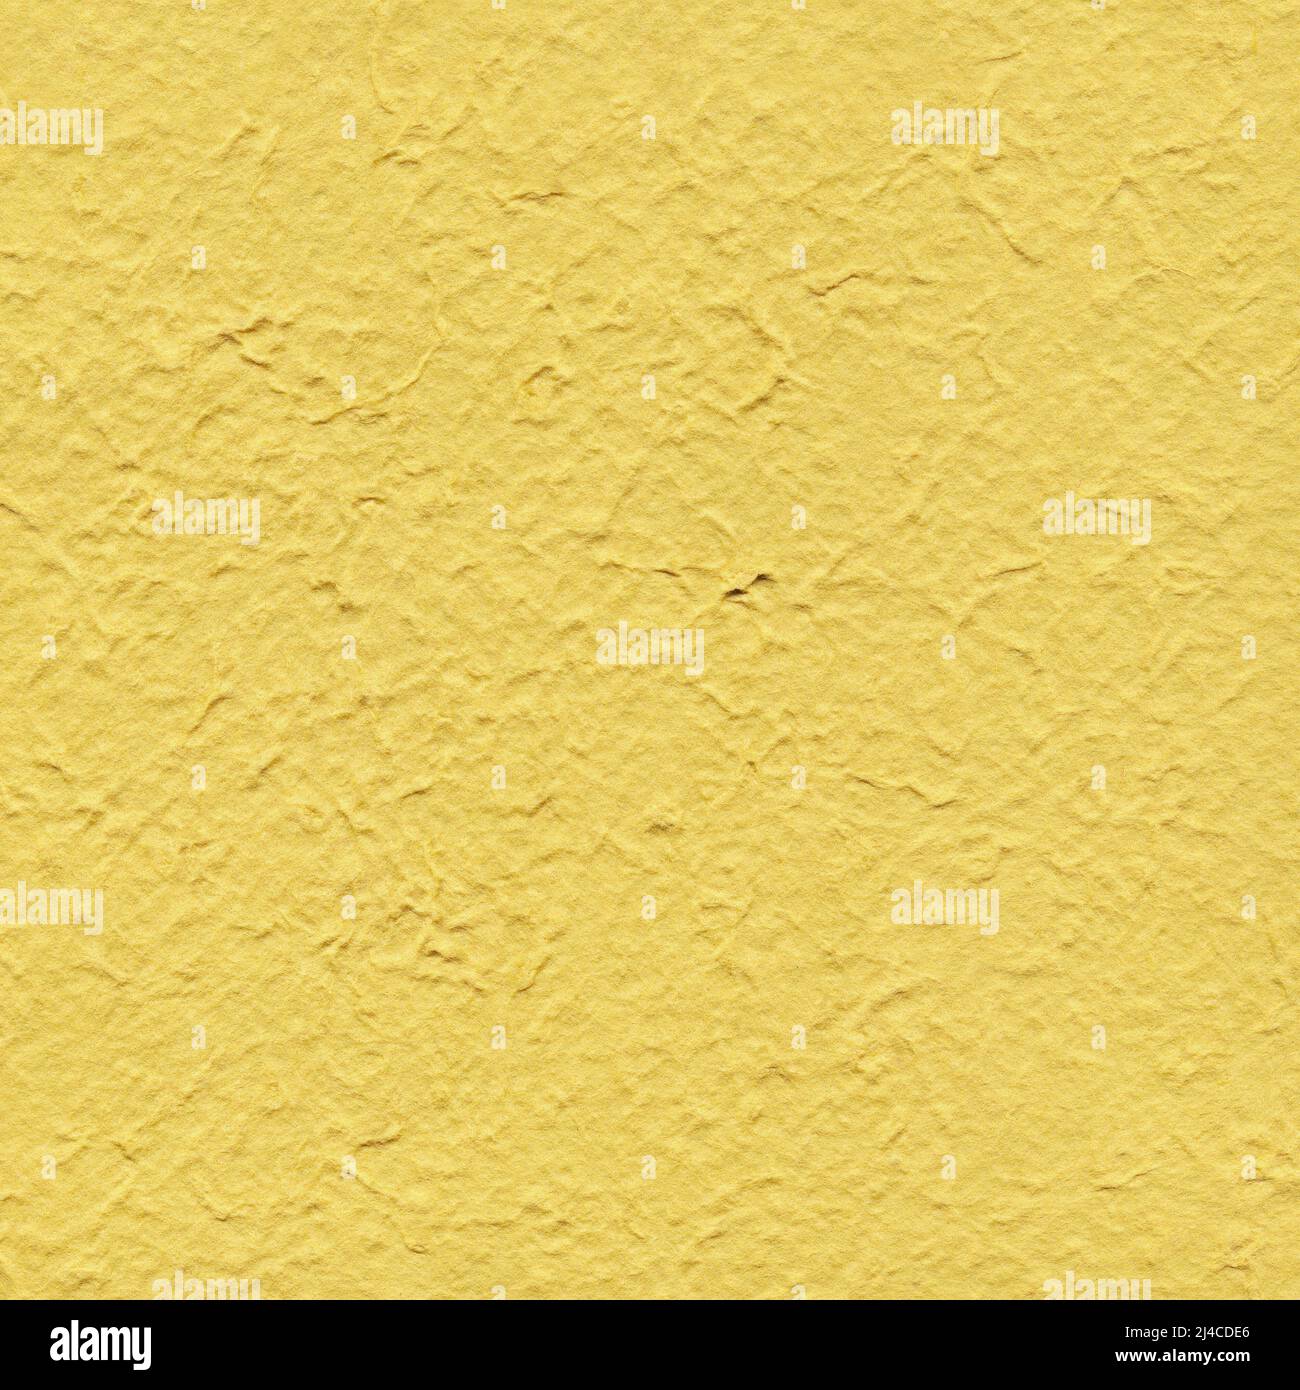 Yellow handmade paper background with pattern Stock Photo